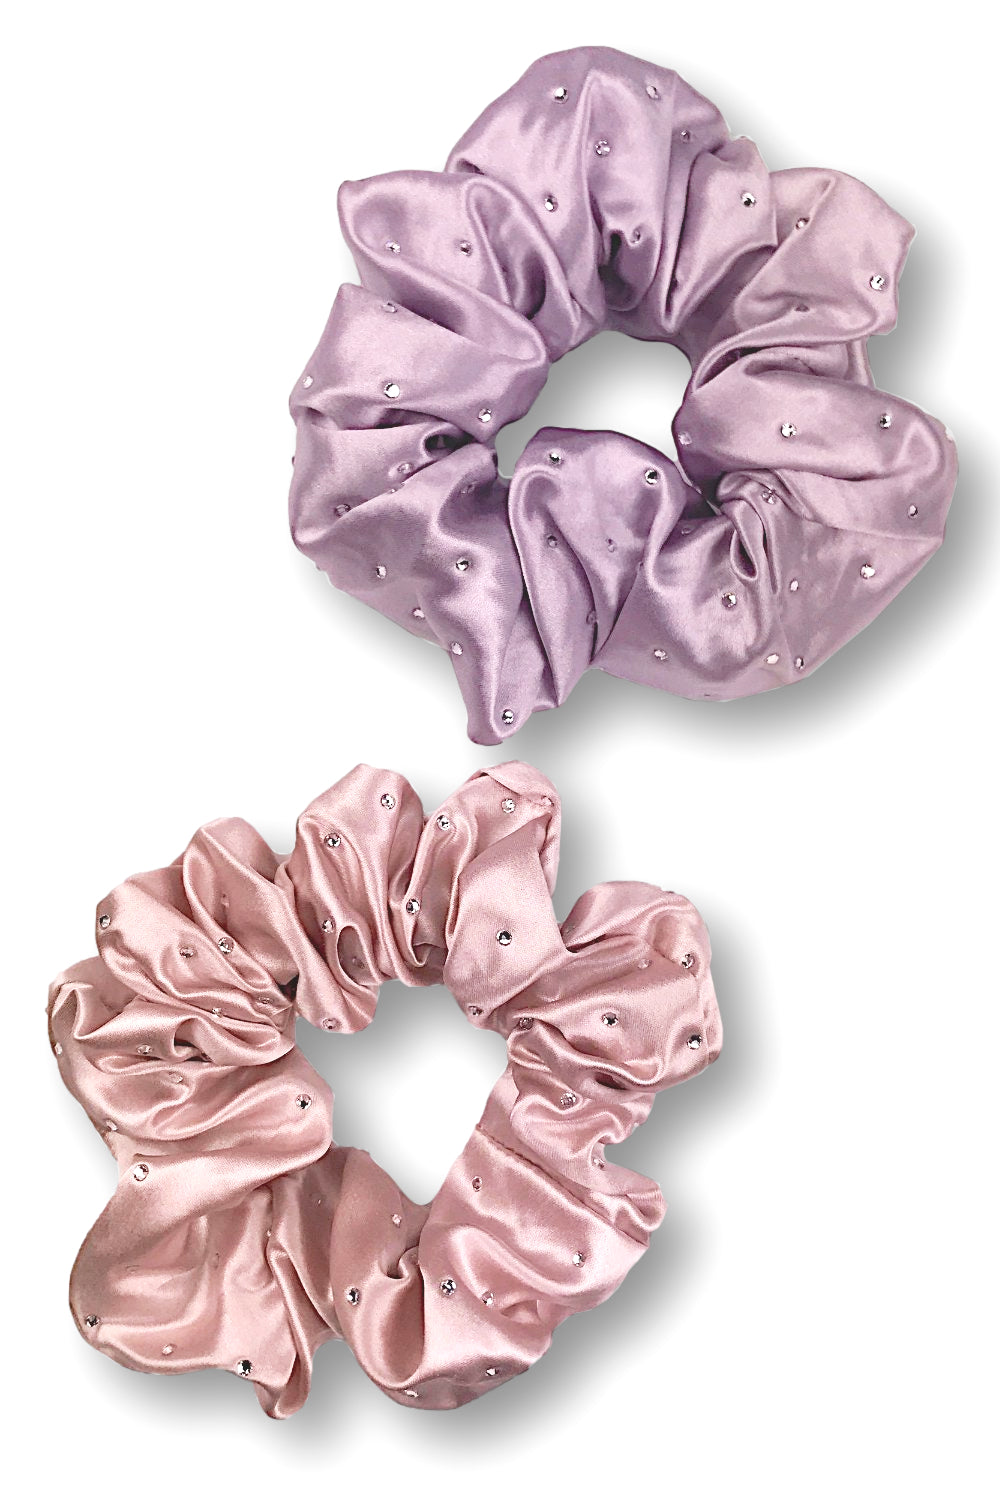 Celestial Silk scrunchies with crystals, silk hair ties with rhinestones pink and purple silk hair scrunchies with white background